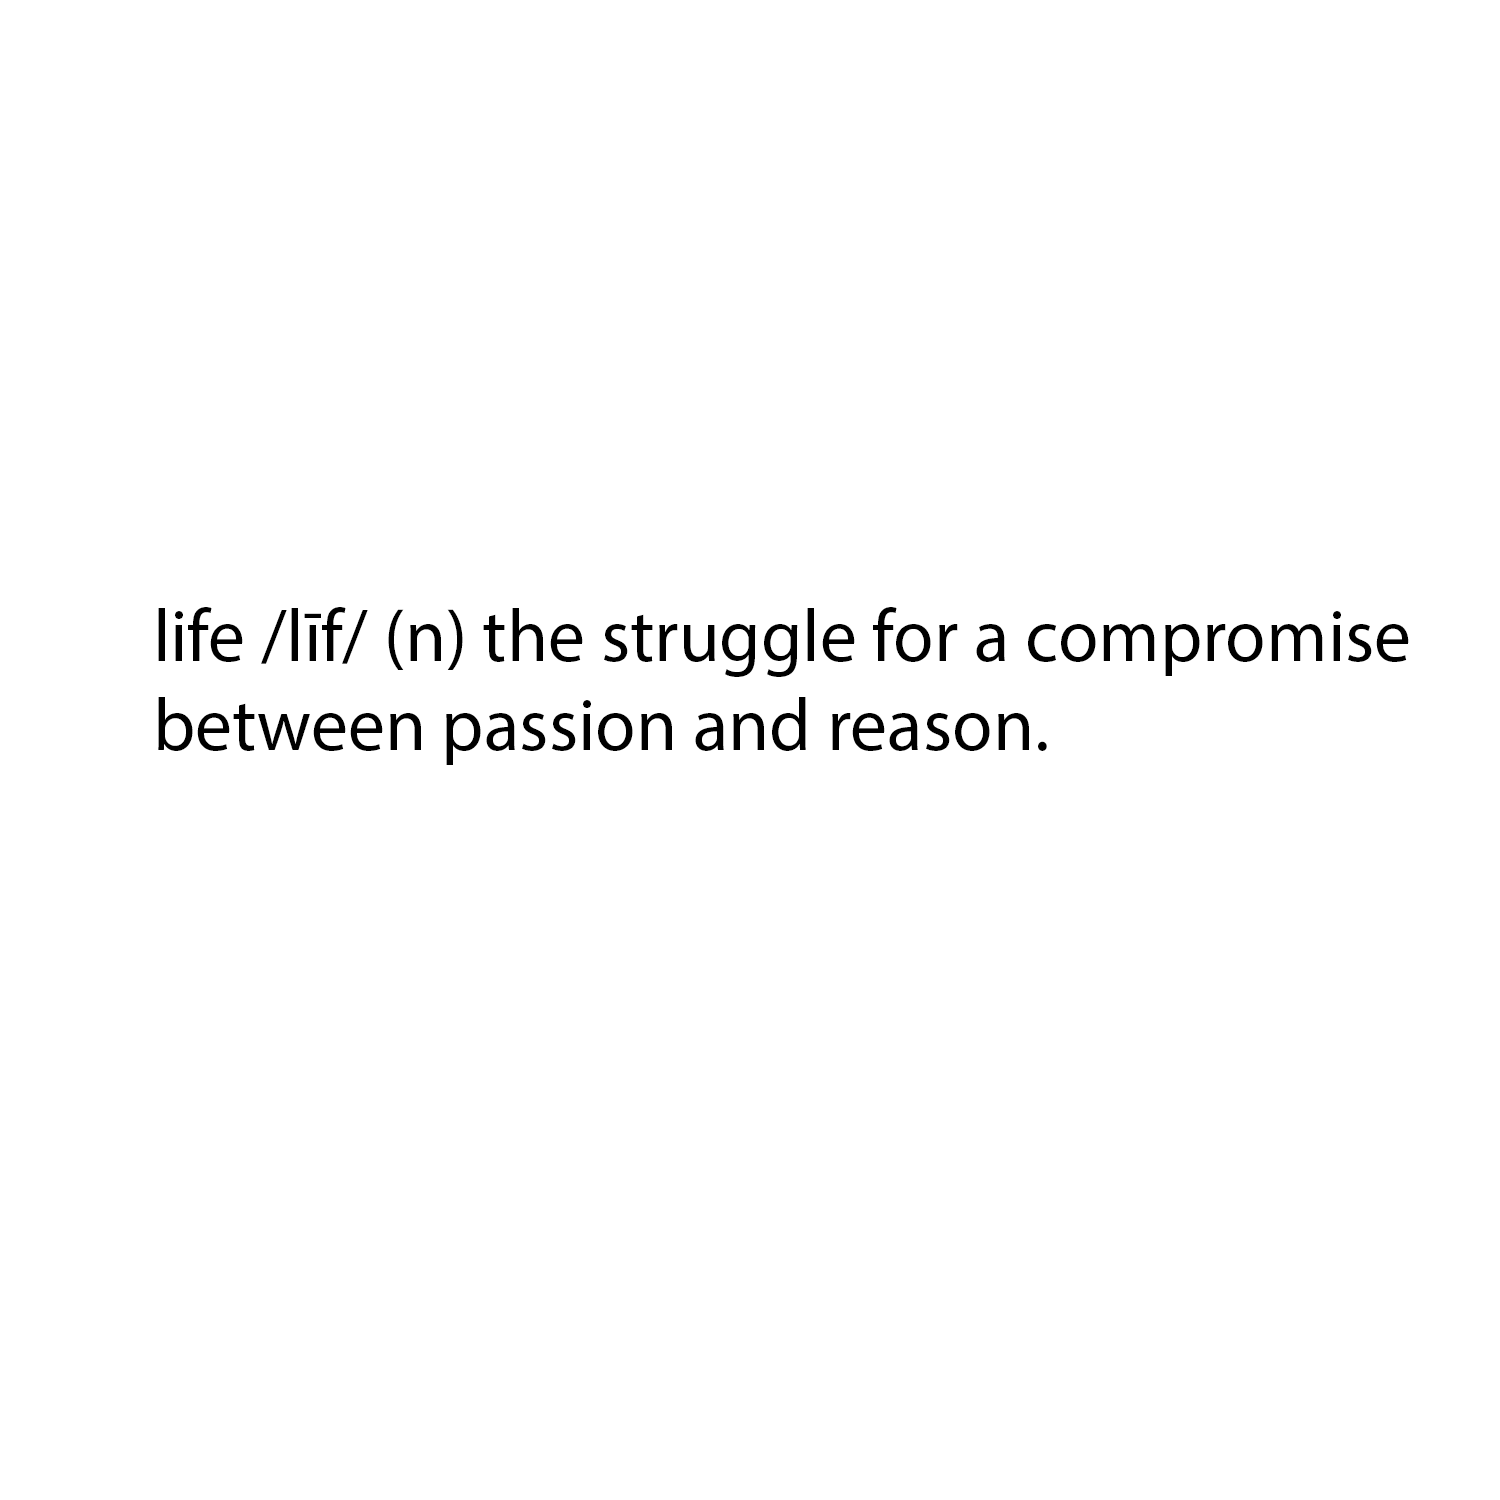 life (n) the struggle for a compromise between passion and reason